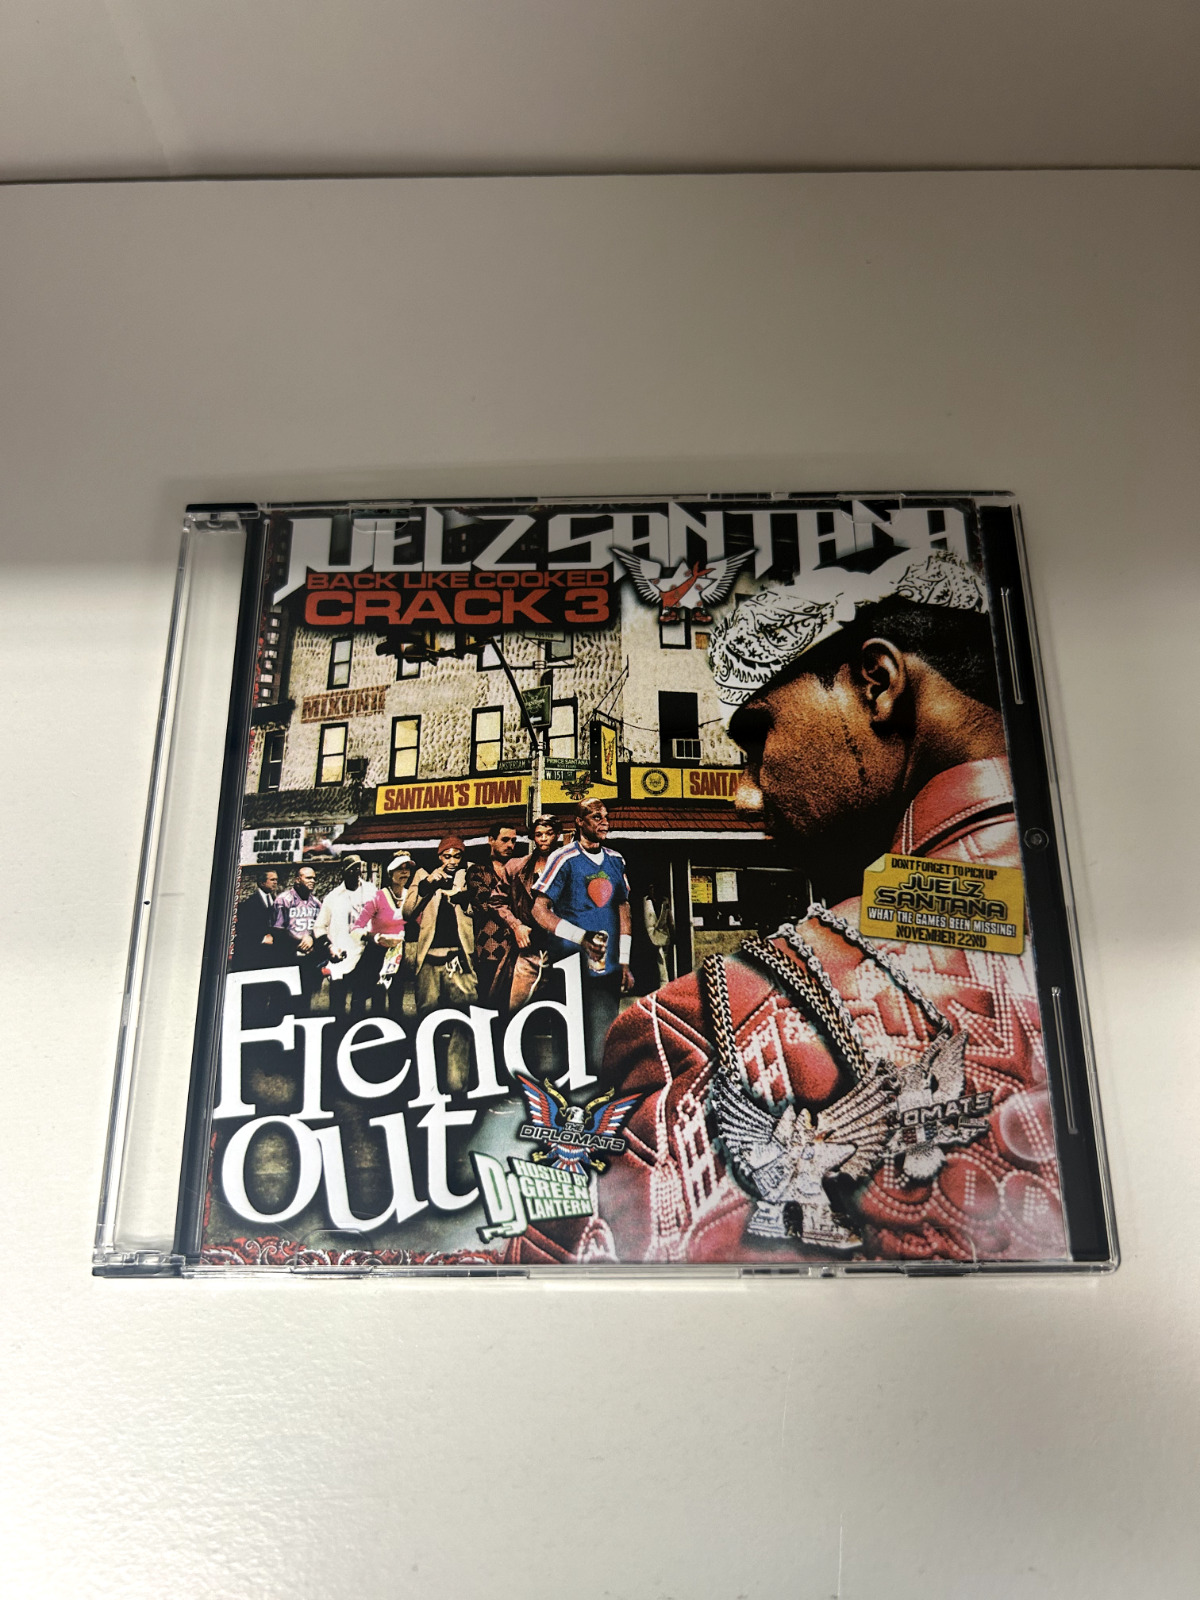 RARE JUELZ SANTANA BACK LIKE COOKED CRACK 3 FIEND OUT DIPSET NYC PROMO MIXTAPE